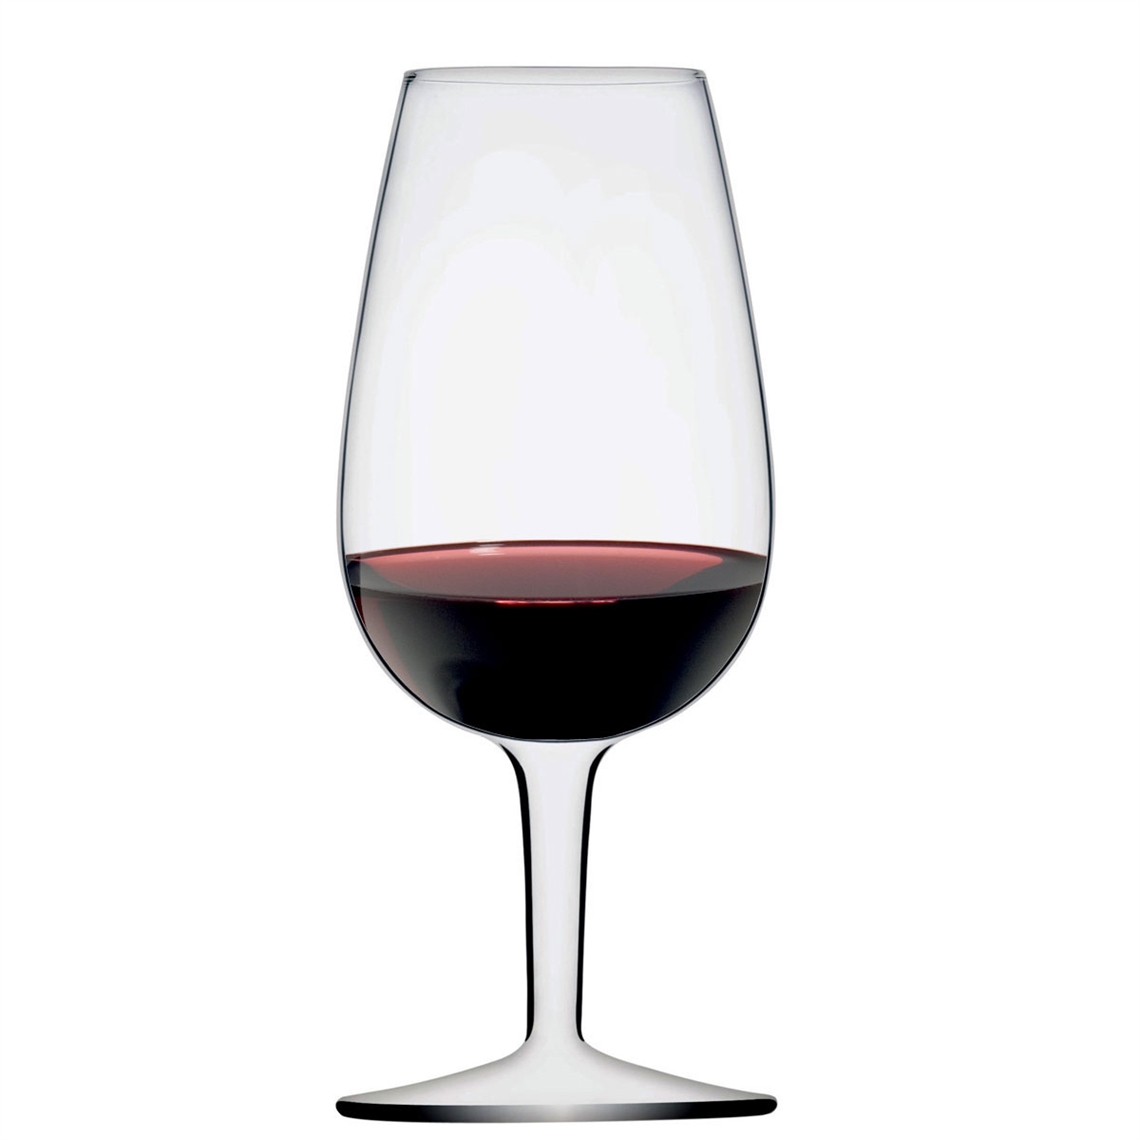 View more prosecco wine glasses from our Wine Tasting Glasses range